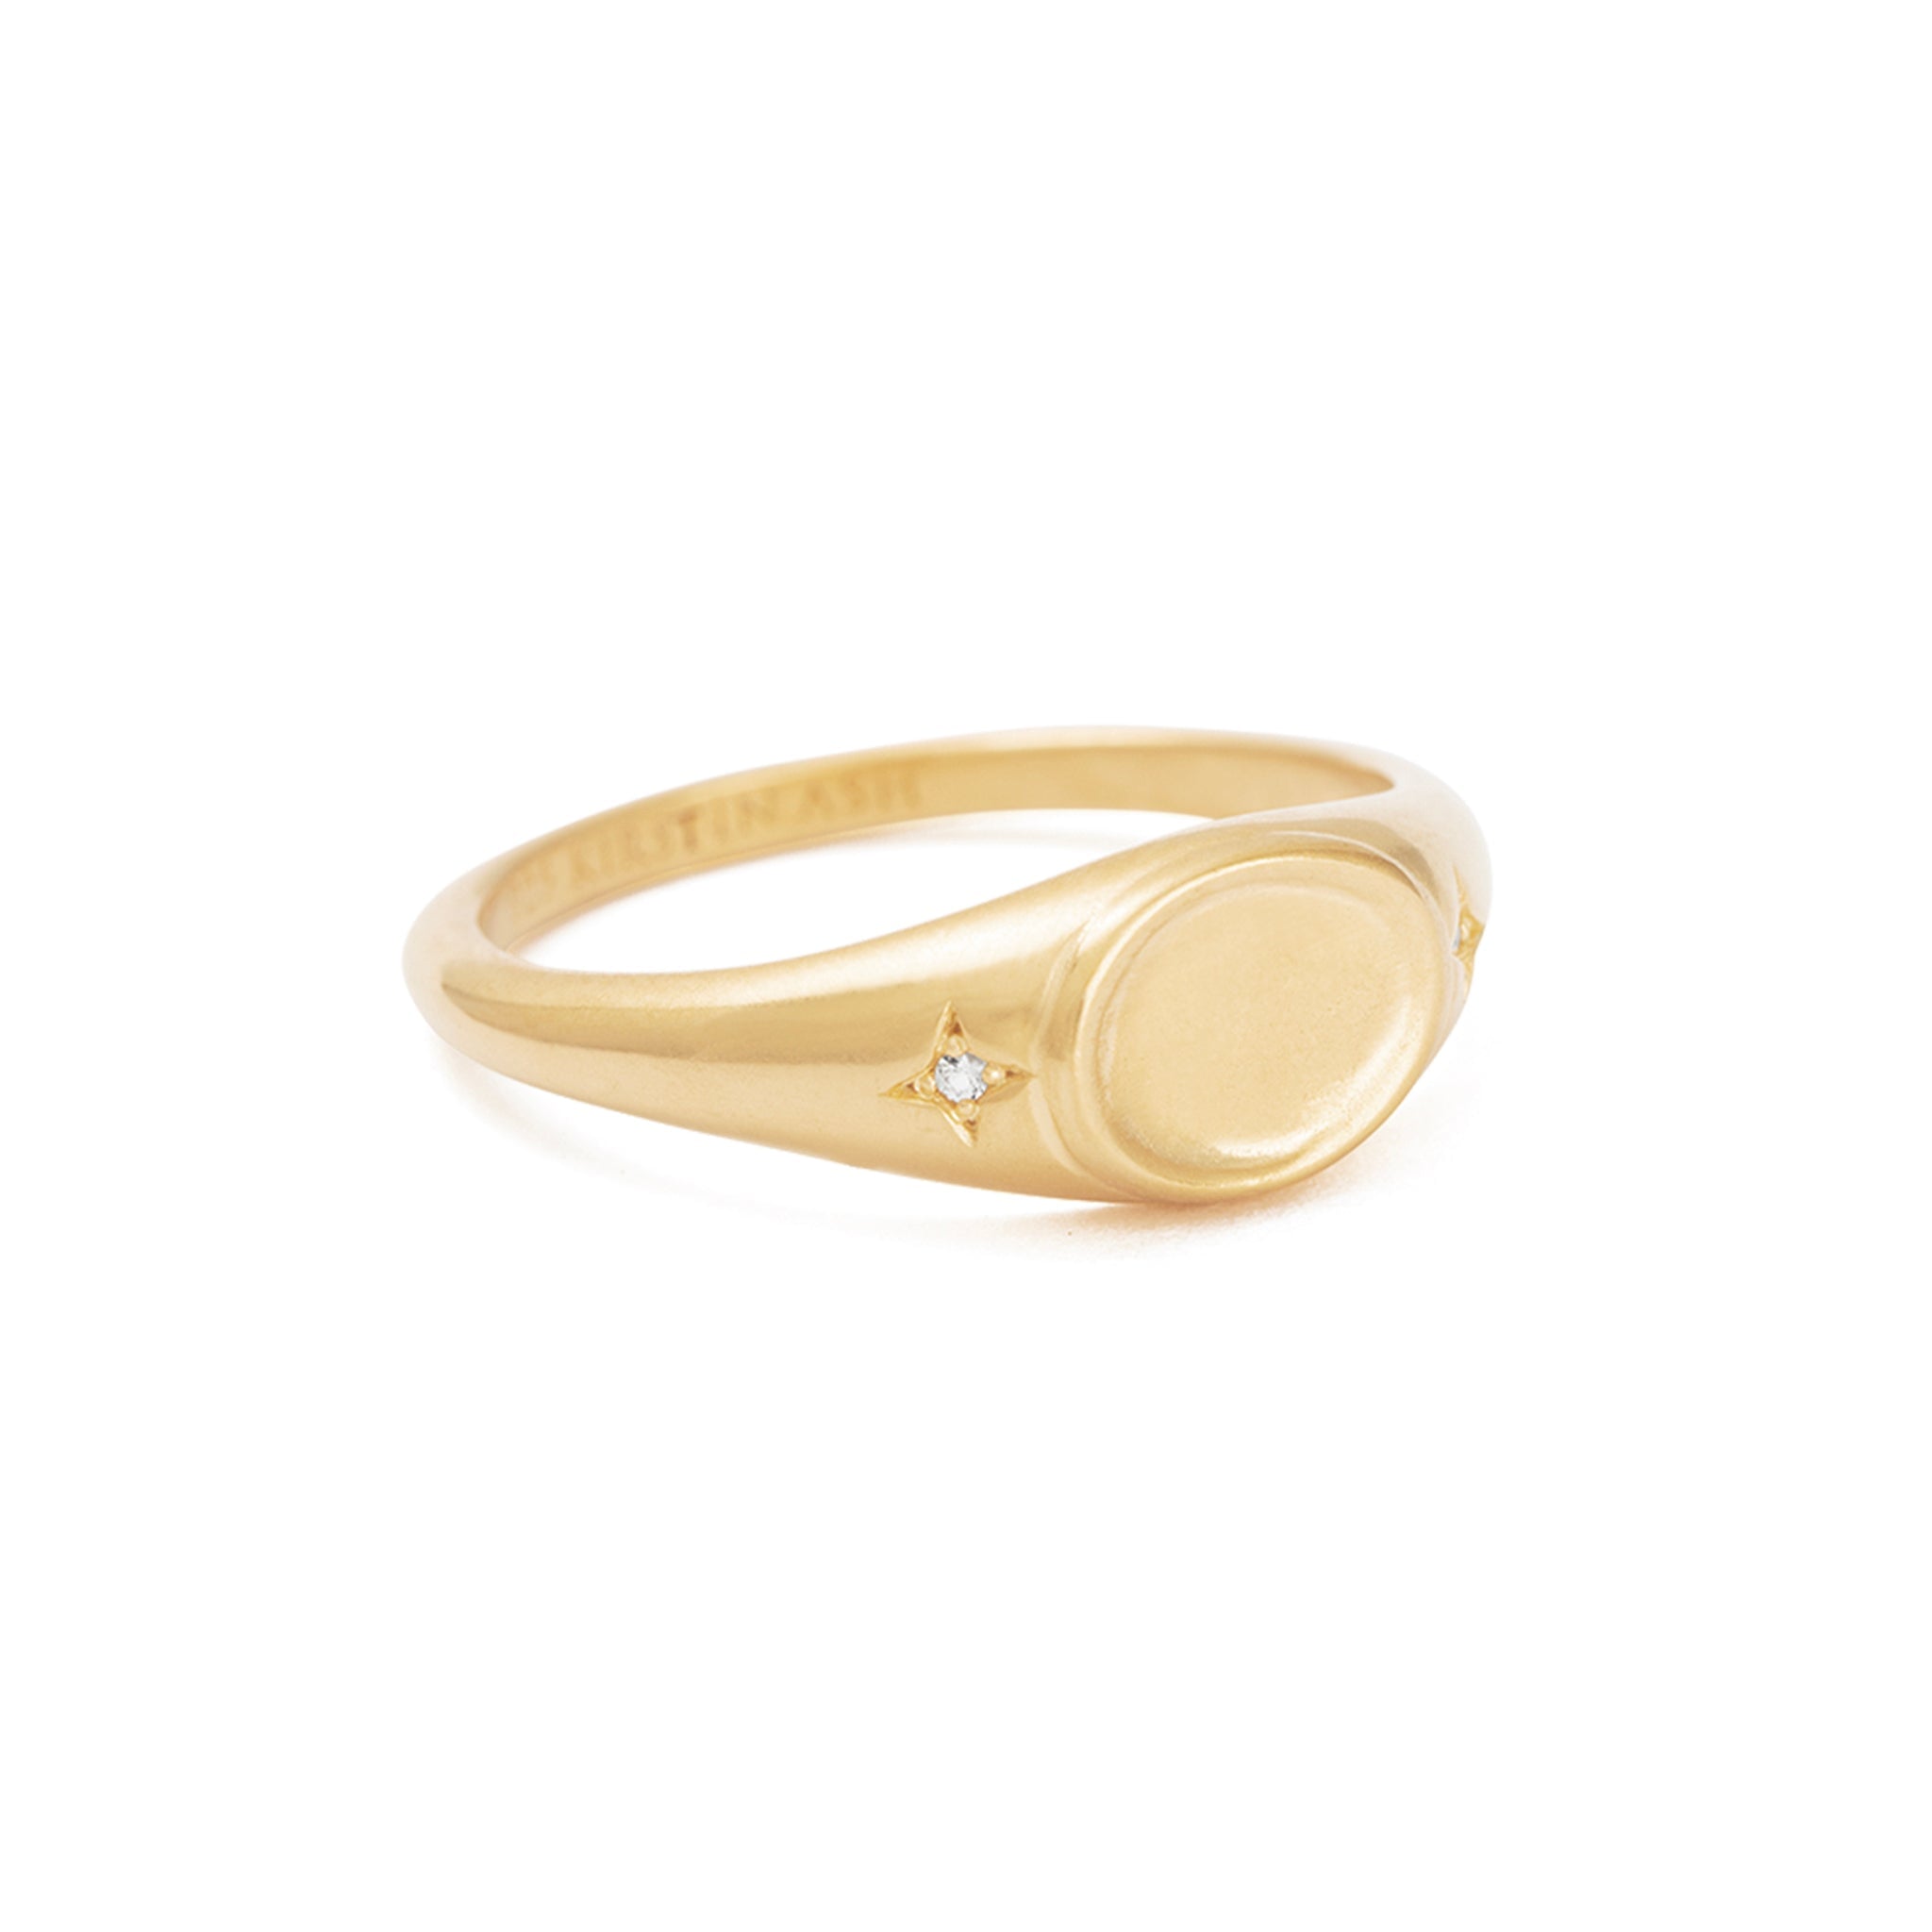 Kirstin Ash Eclipse Collection Signet Ring - Align - Tea Pea Home